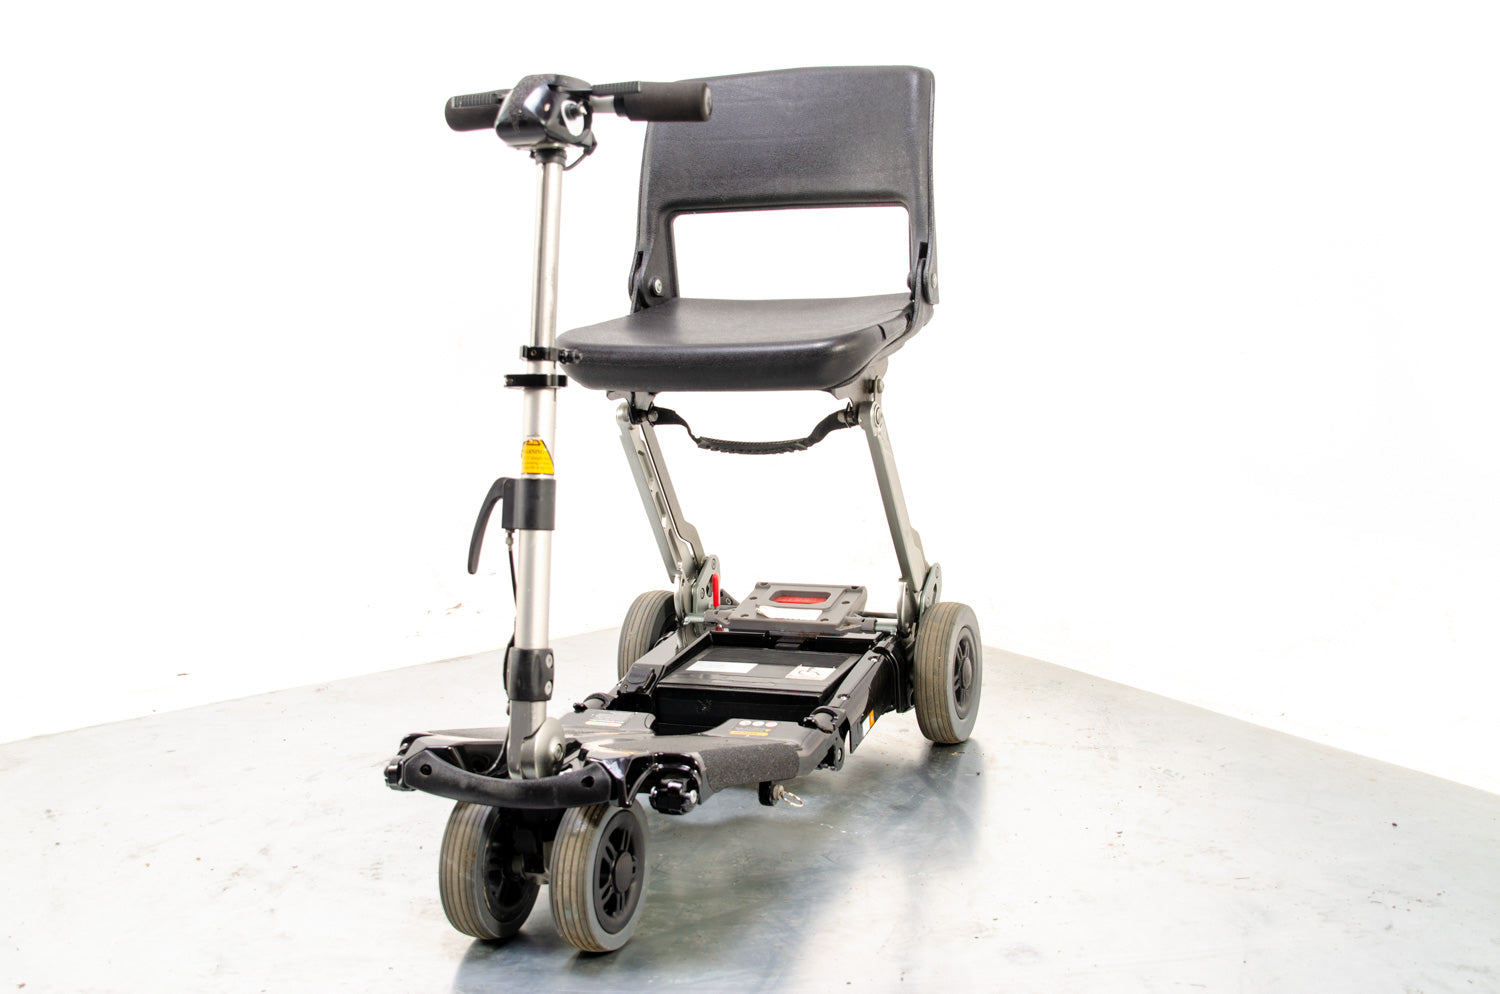 2015 Freerider Luggie Used Mobility Scooter Foilding Transportable Lightweight Lithium Travel